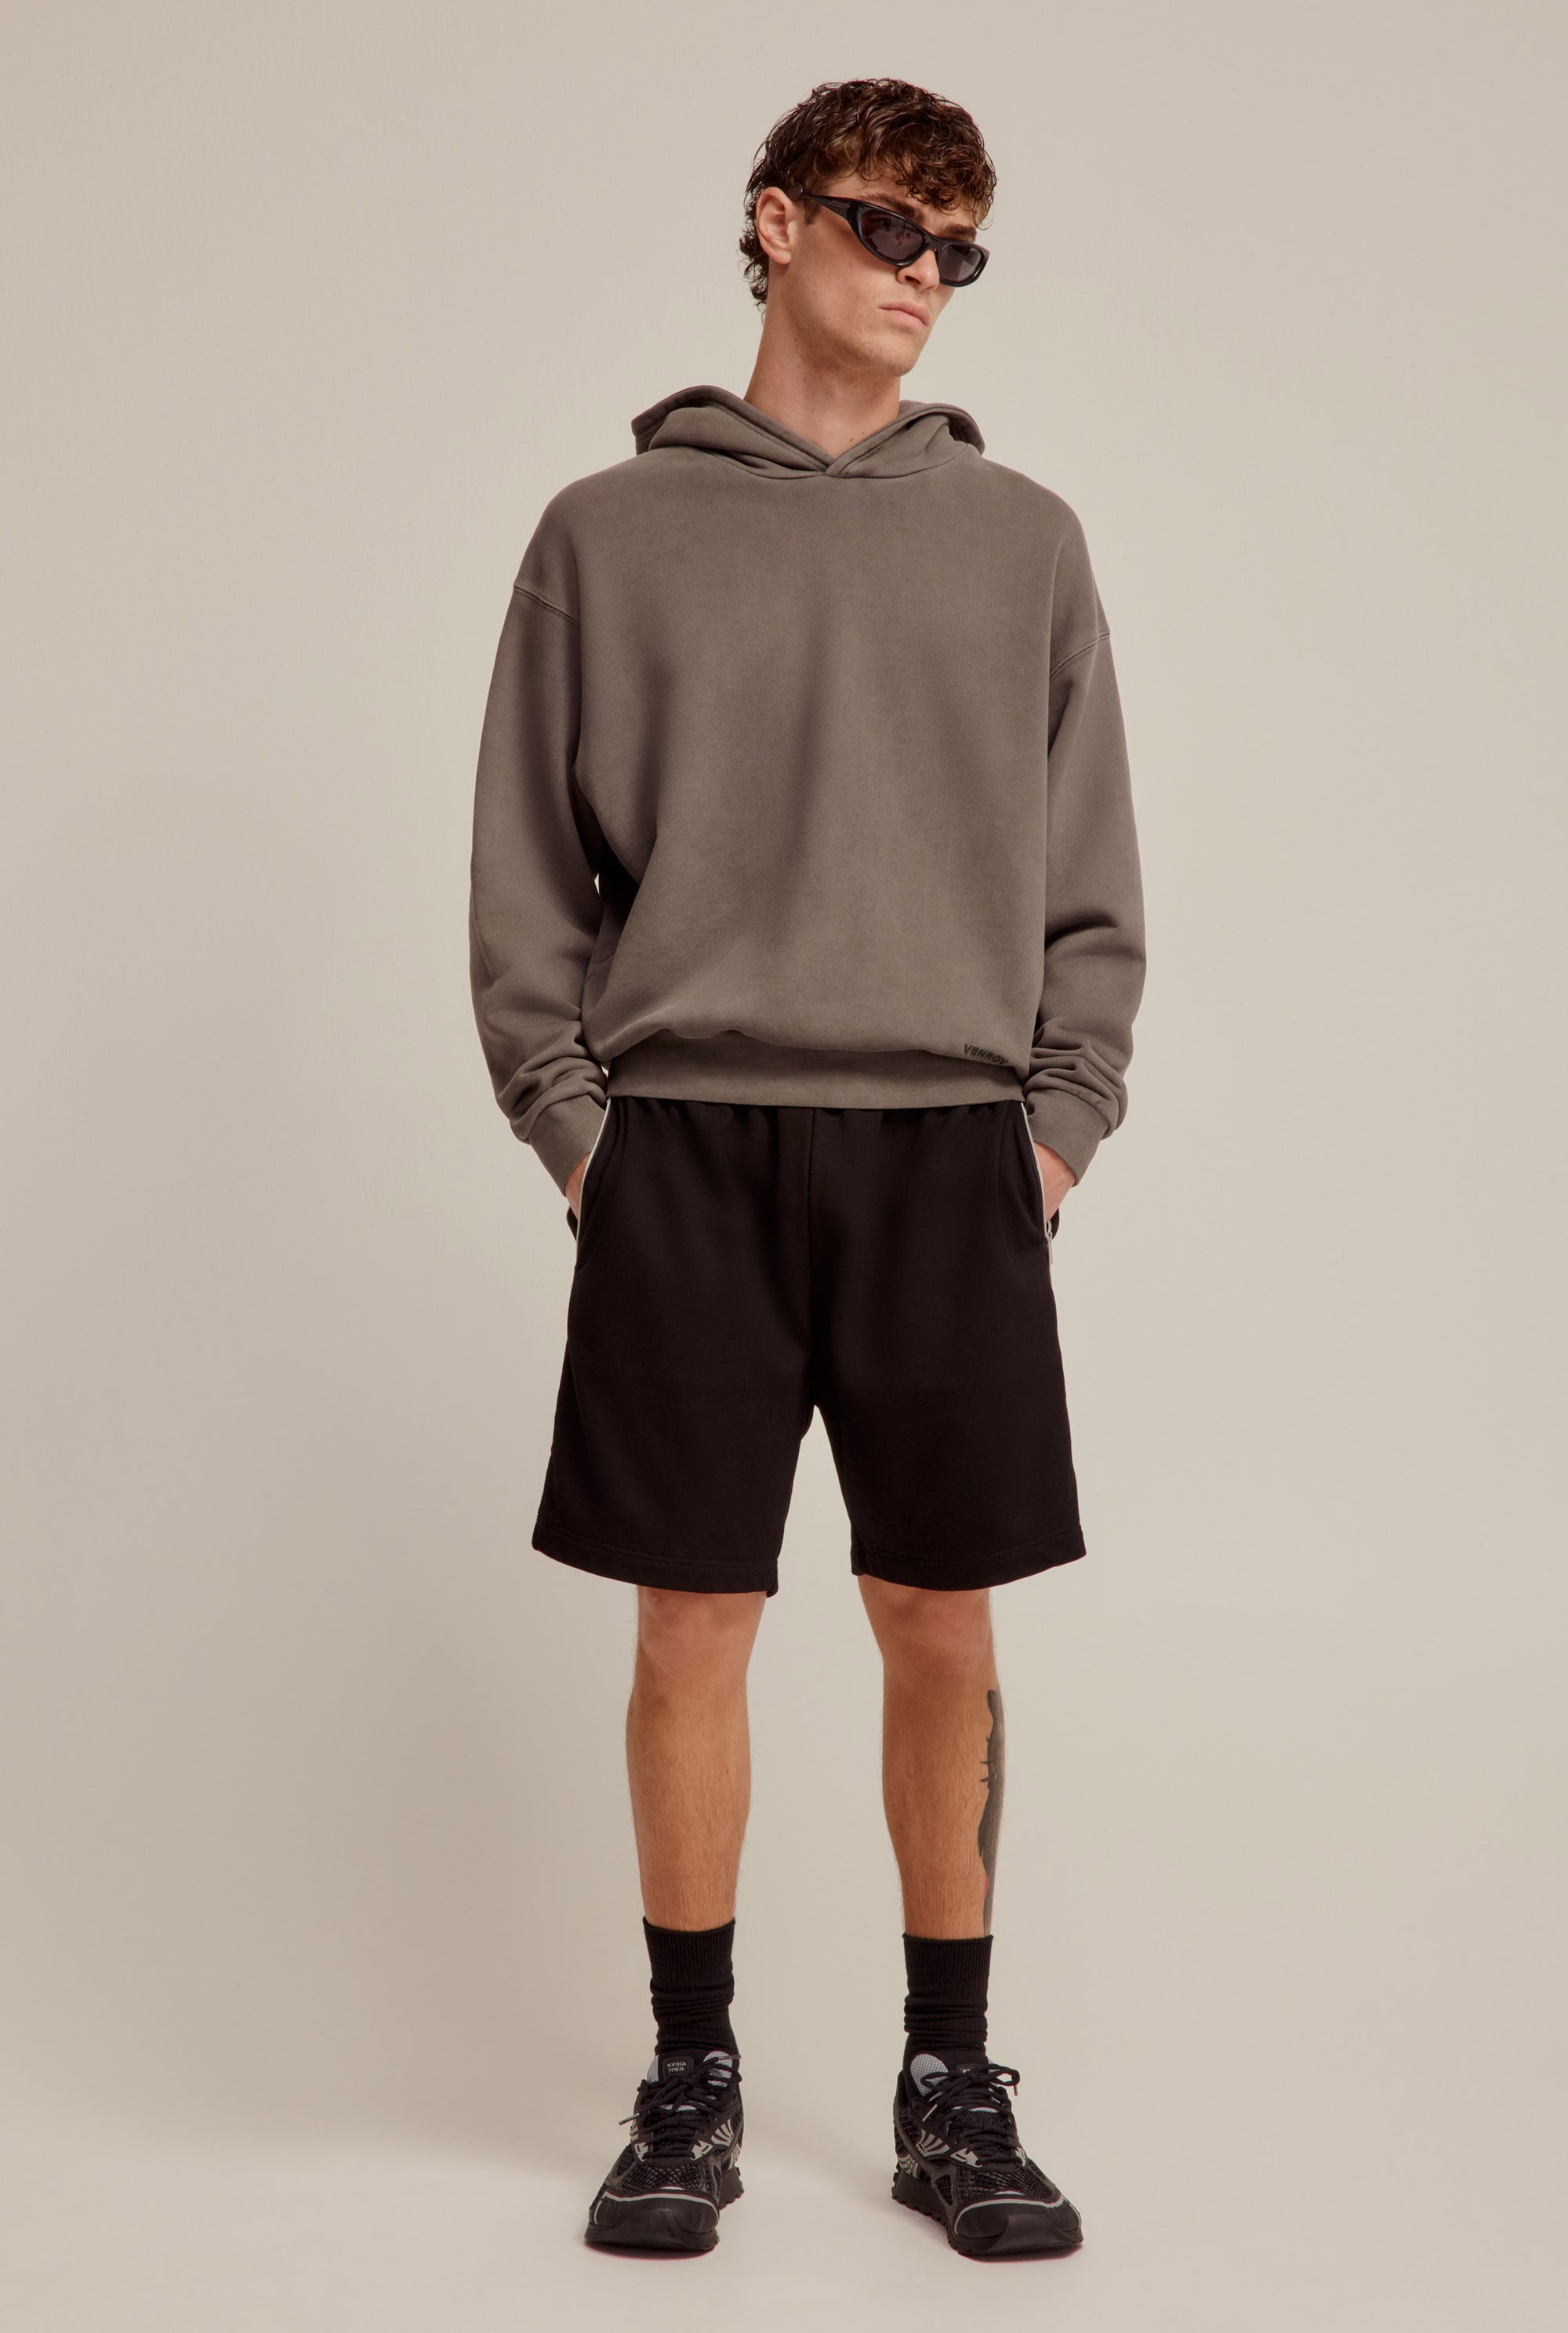 Pigment Dyed Heavy Weight Track Hoodie - Charcoal